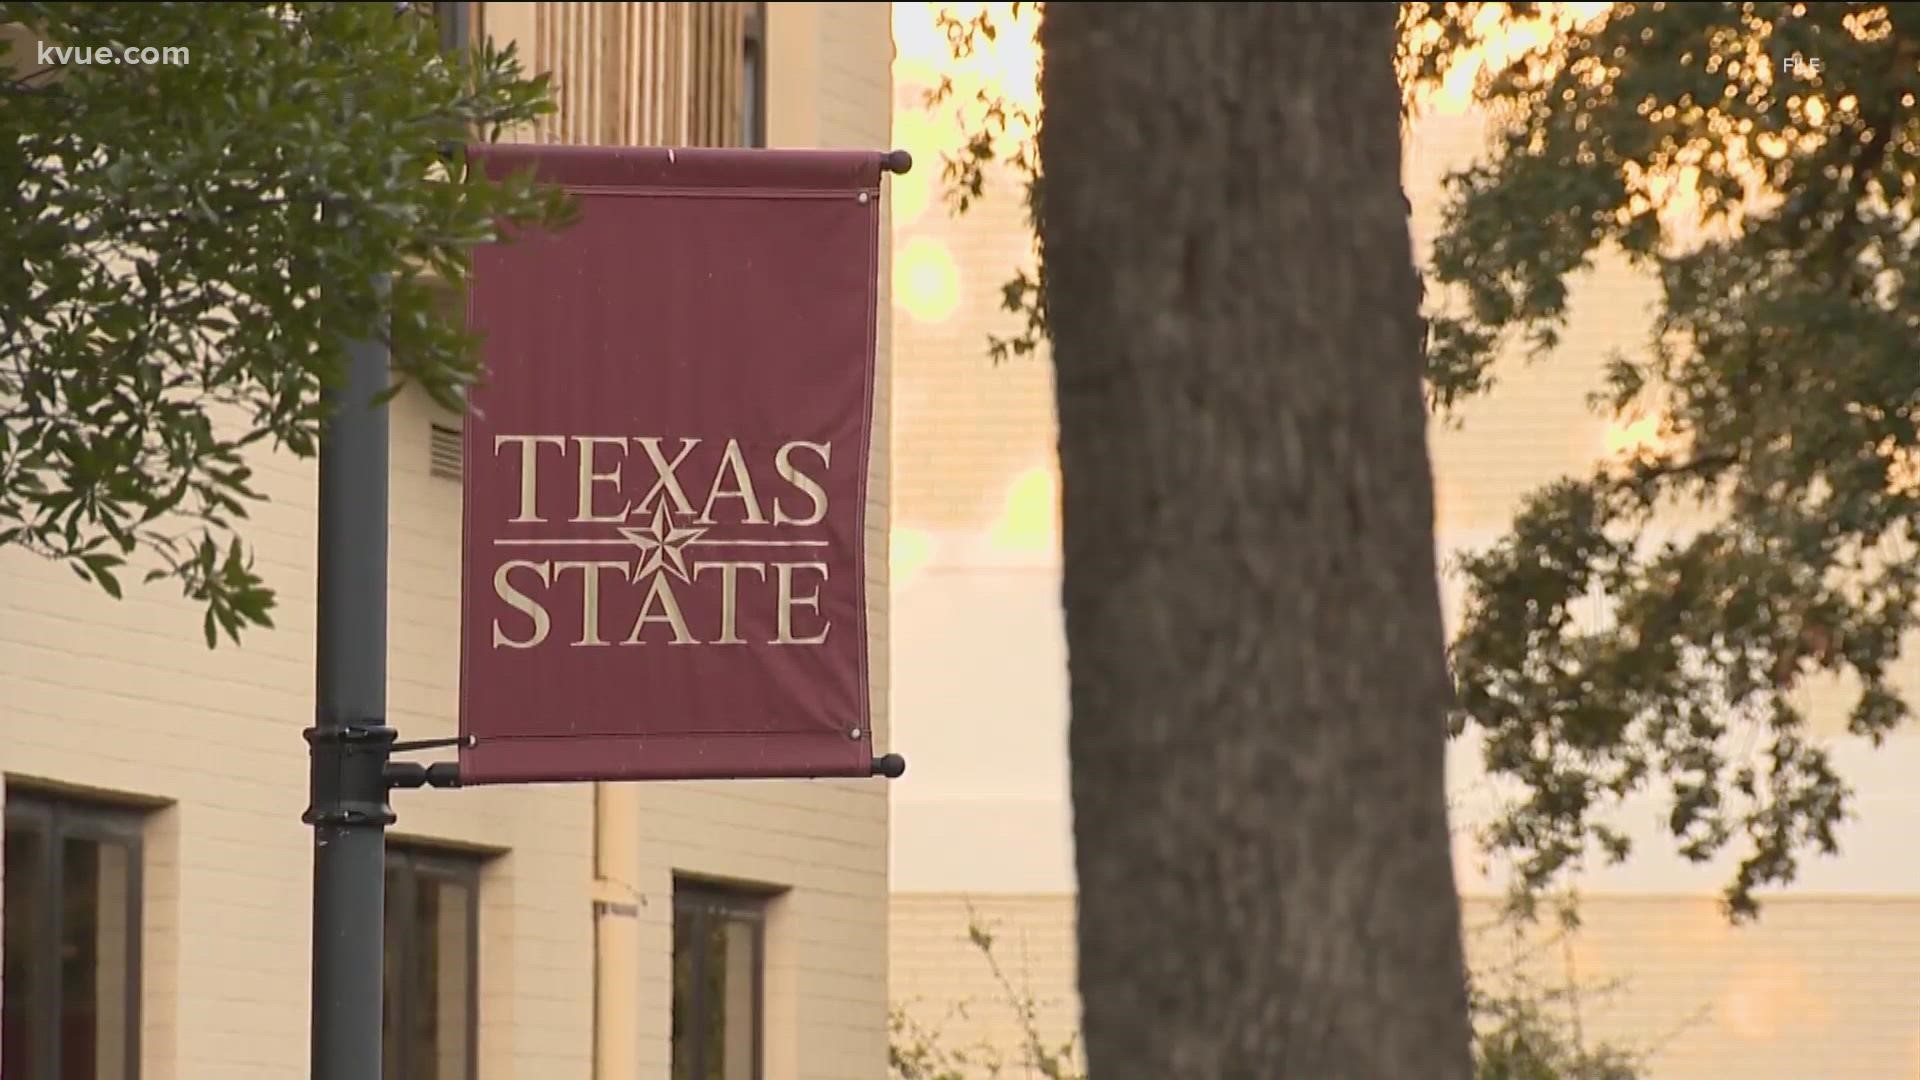 Texas State University also said its students would have to complete a COVID-19 PCR test within four days prior to move-in, or show documentation of a negative test.